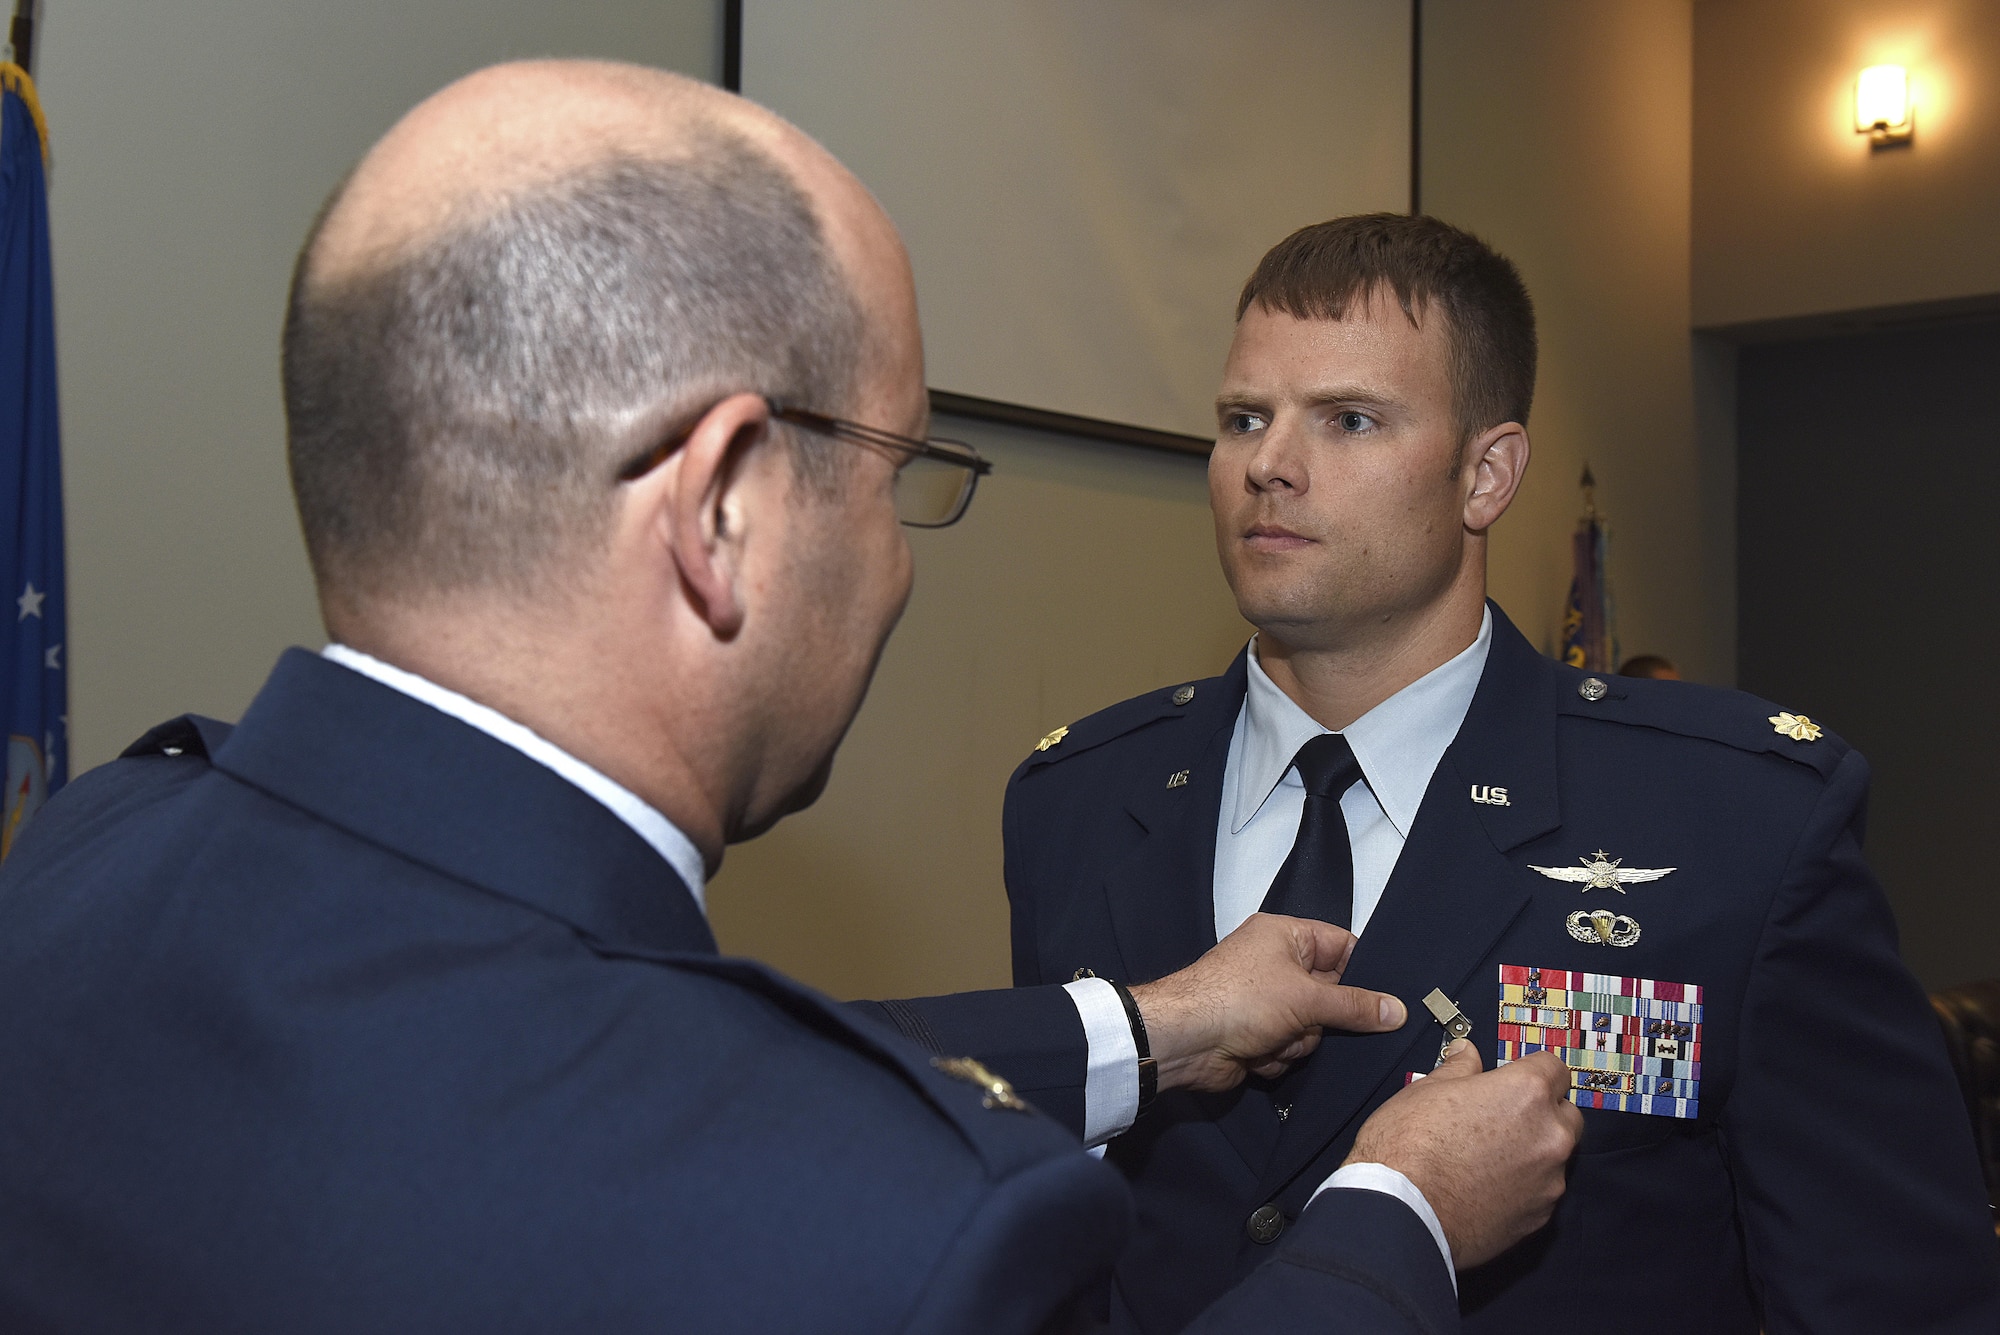 U.S. Air Force Maj. Stephen Maddox, 17th Communications Squadron commander, stands at attention as Col. Christopher Harris, 17th Mission Support Group commander, pins on a Meritorious Service medal during the 17th CS change of command ceremony at the Event Center on Goodfellow Air Force Base, Texas, May 31, 2017. Maddox received the medal for outstanding service to his unit by providing new equipment and deployment opportunities for Airmen despite low manning